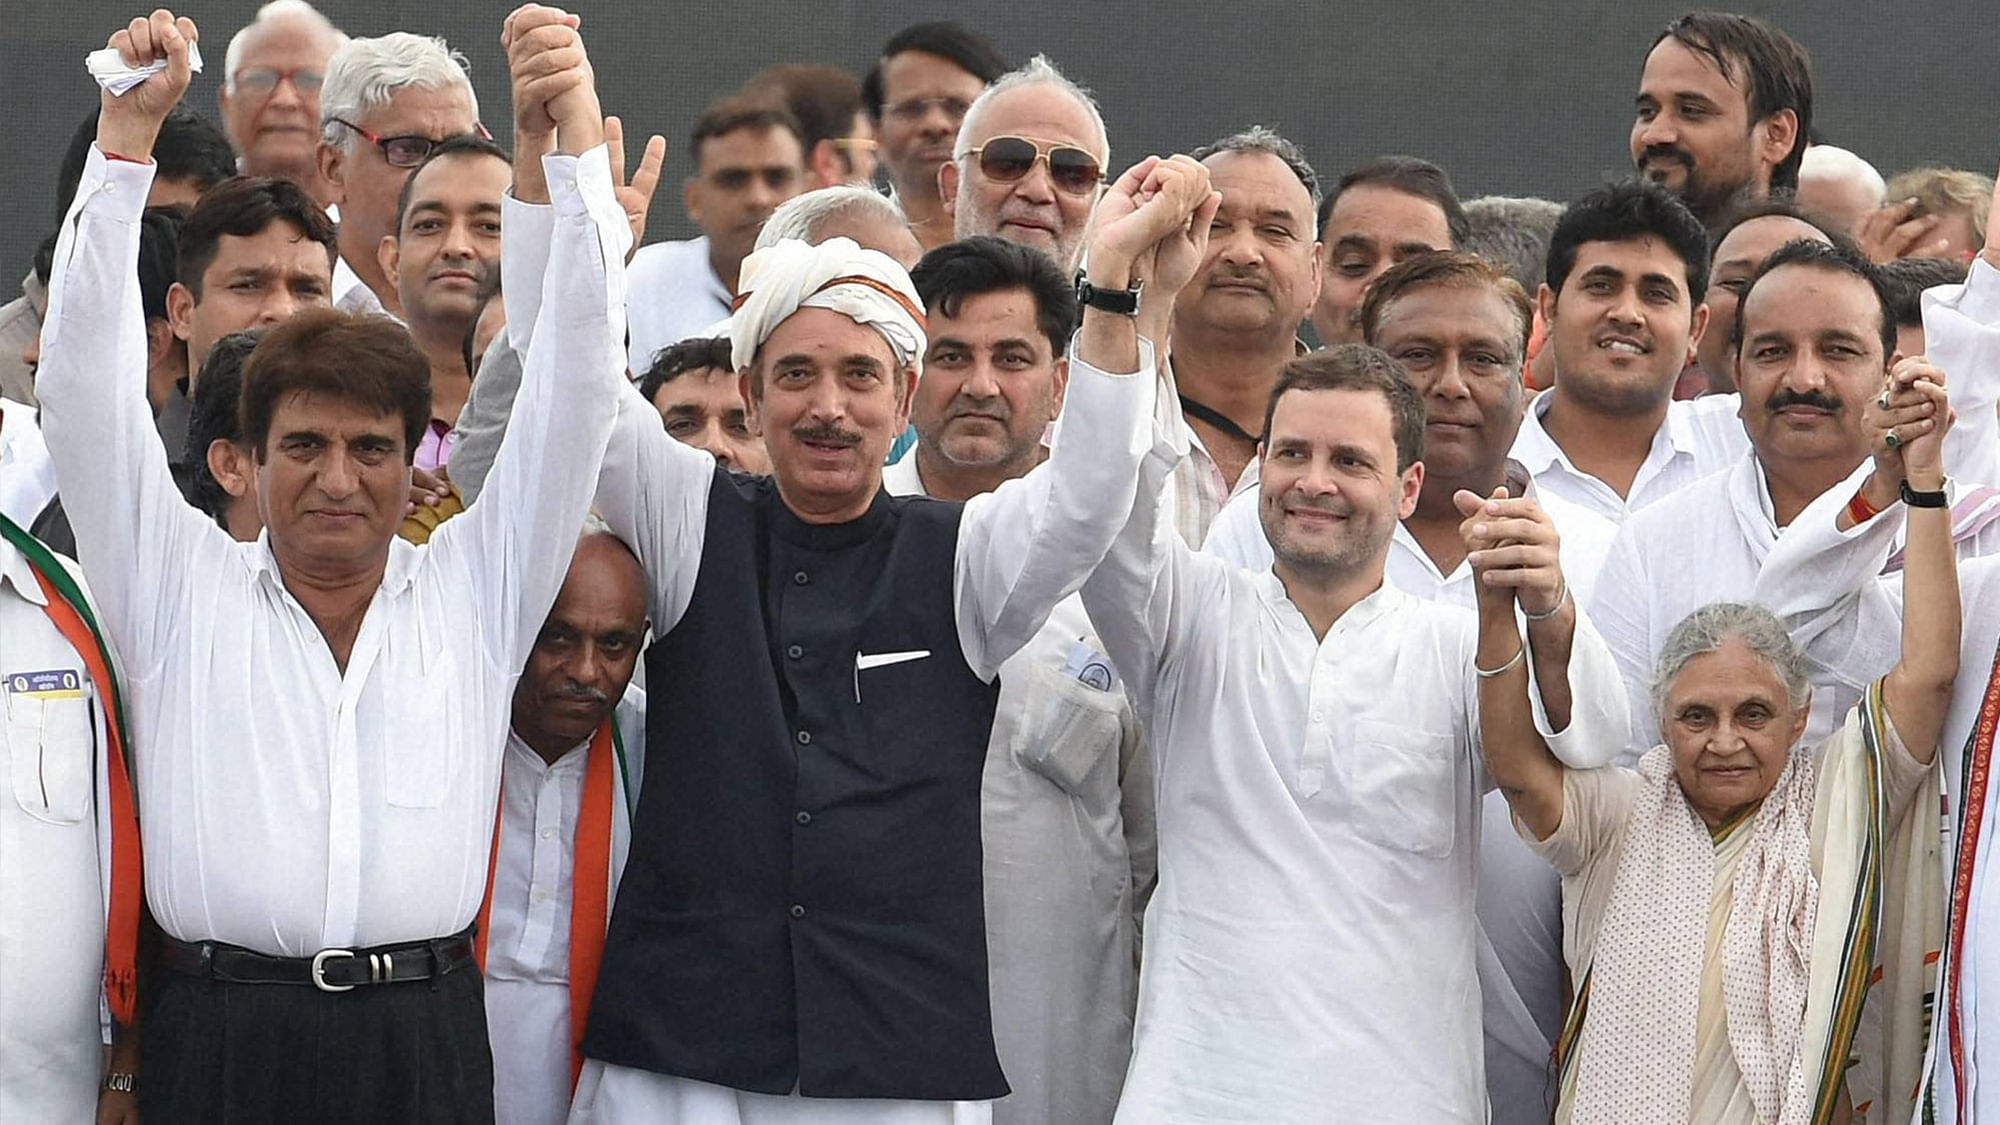 Congress Vice President Rahul Gandhi with UP Congress chief Raj Babbar, senior leader Ghulam Nabi Azad and the party’s CM candidate Sheila Dikshit during a party programme in Lucknow on Friday. (Photo: PTI) 